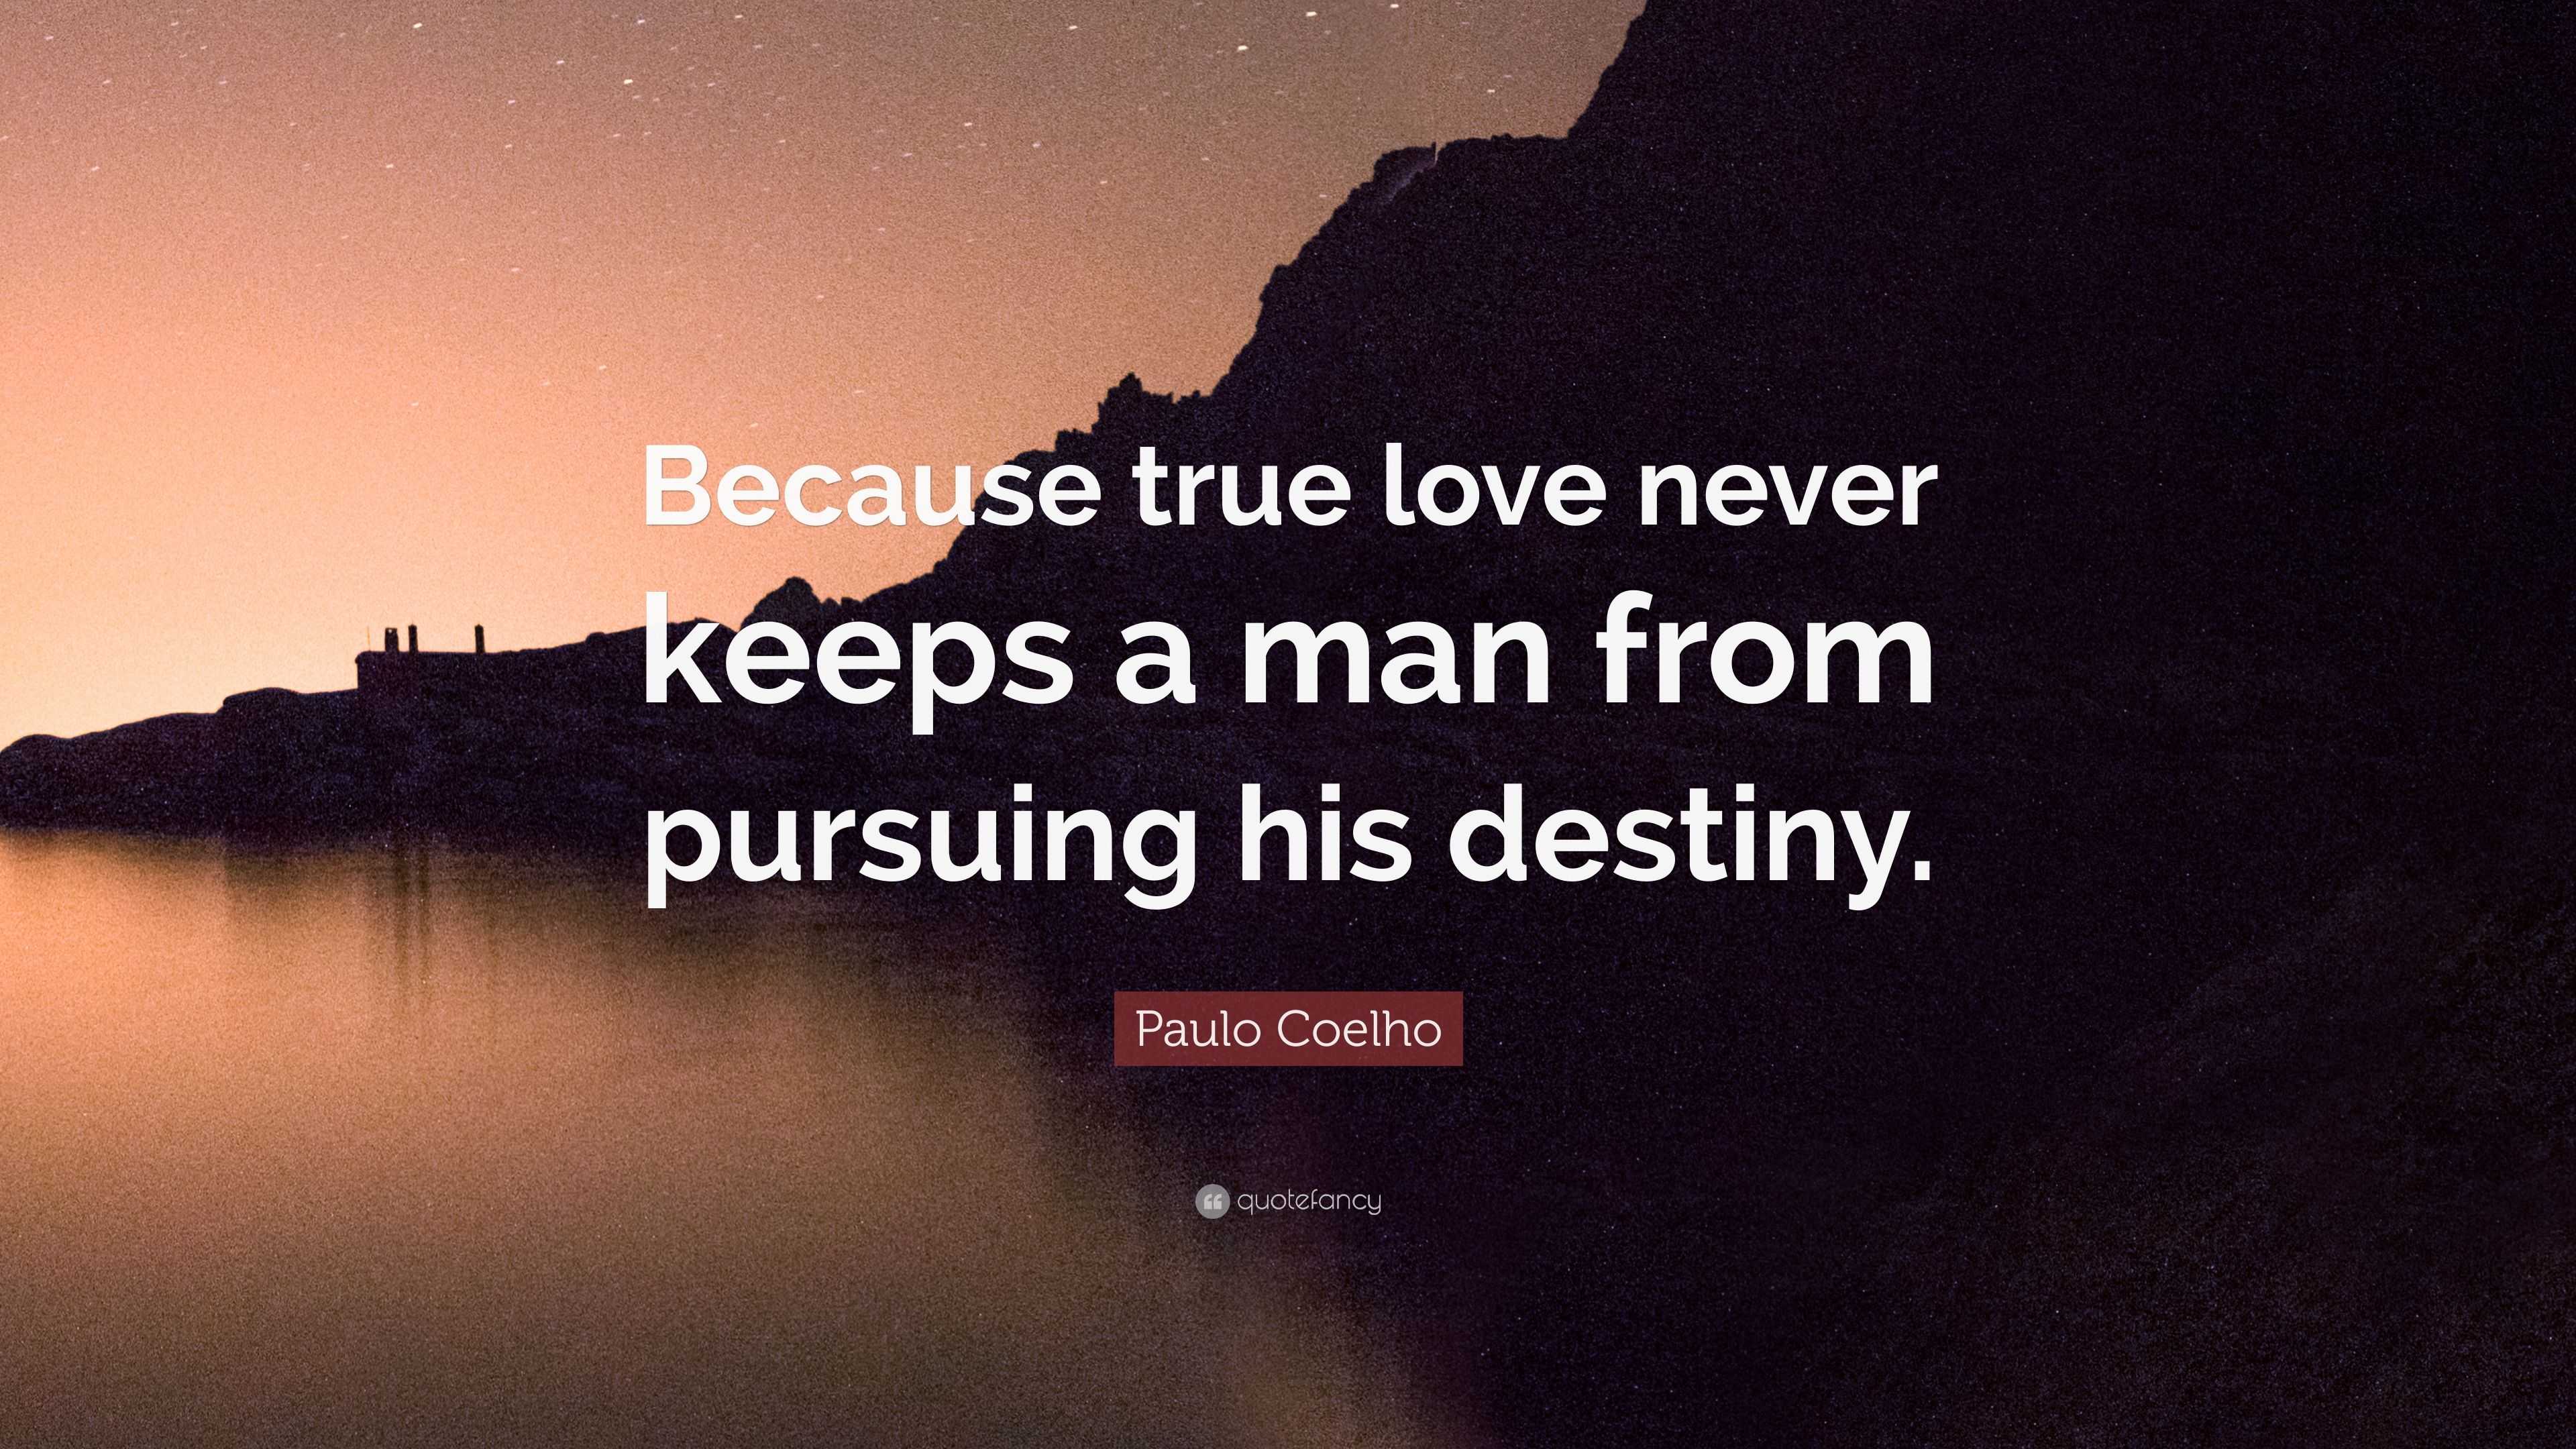 Paulo Coelho Quote “Because true love never keeps a man from pursuing his destiny